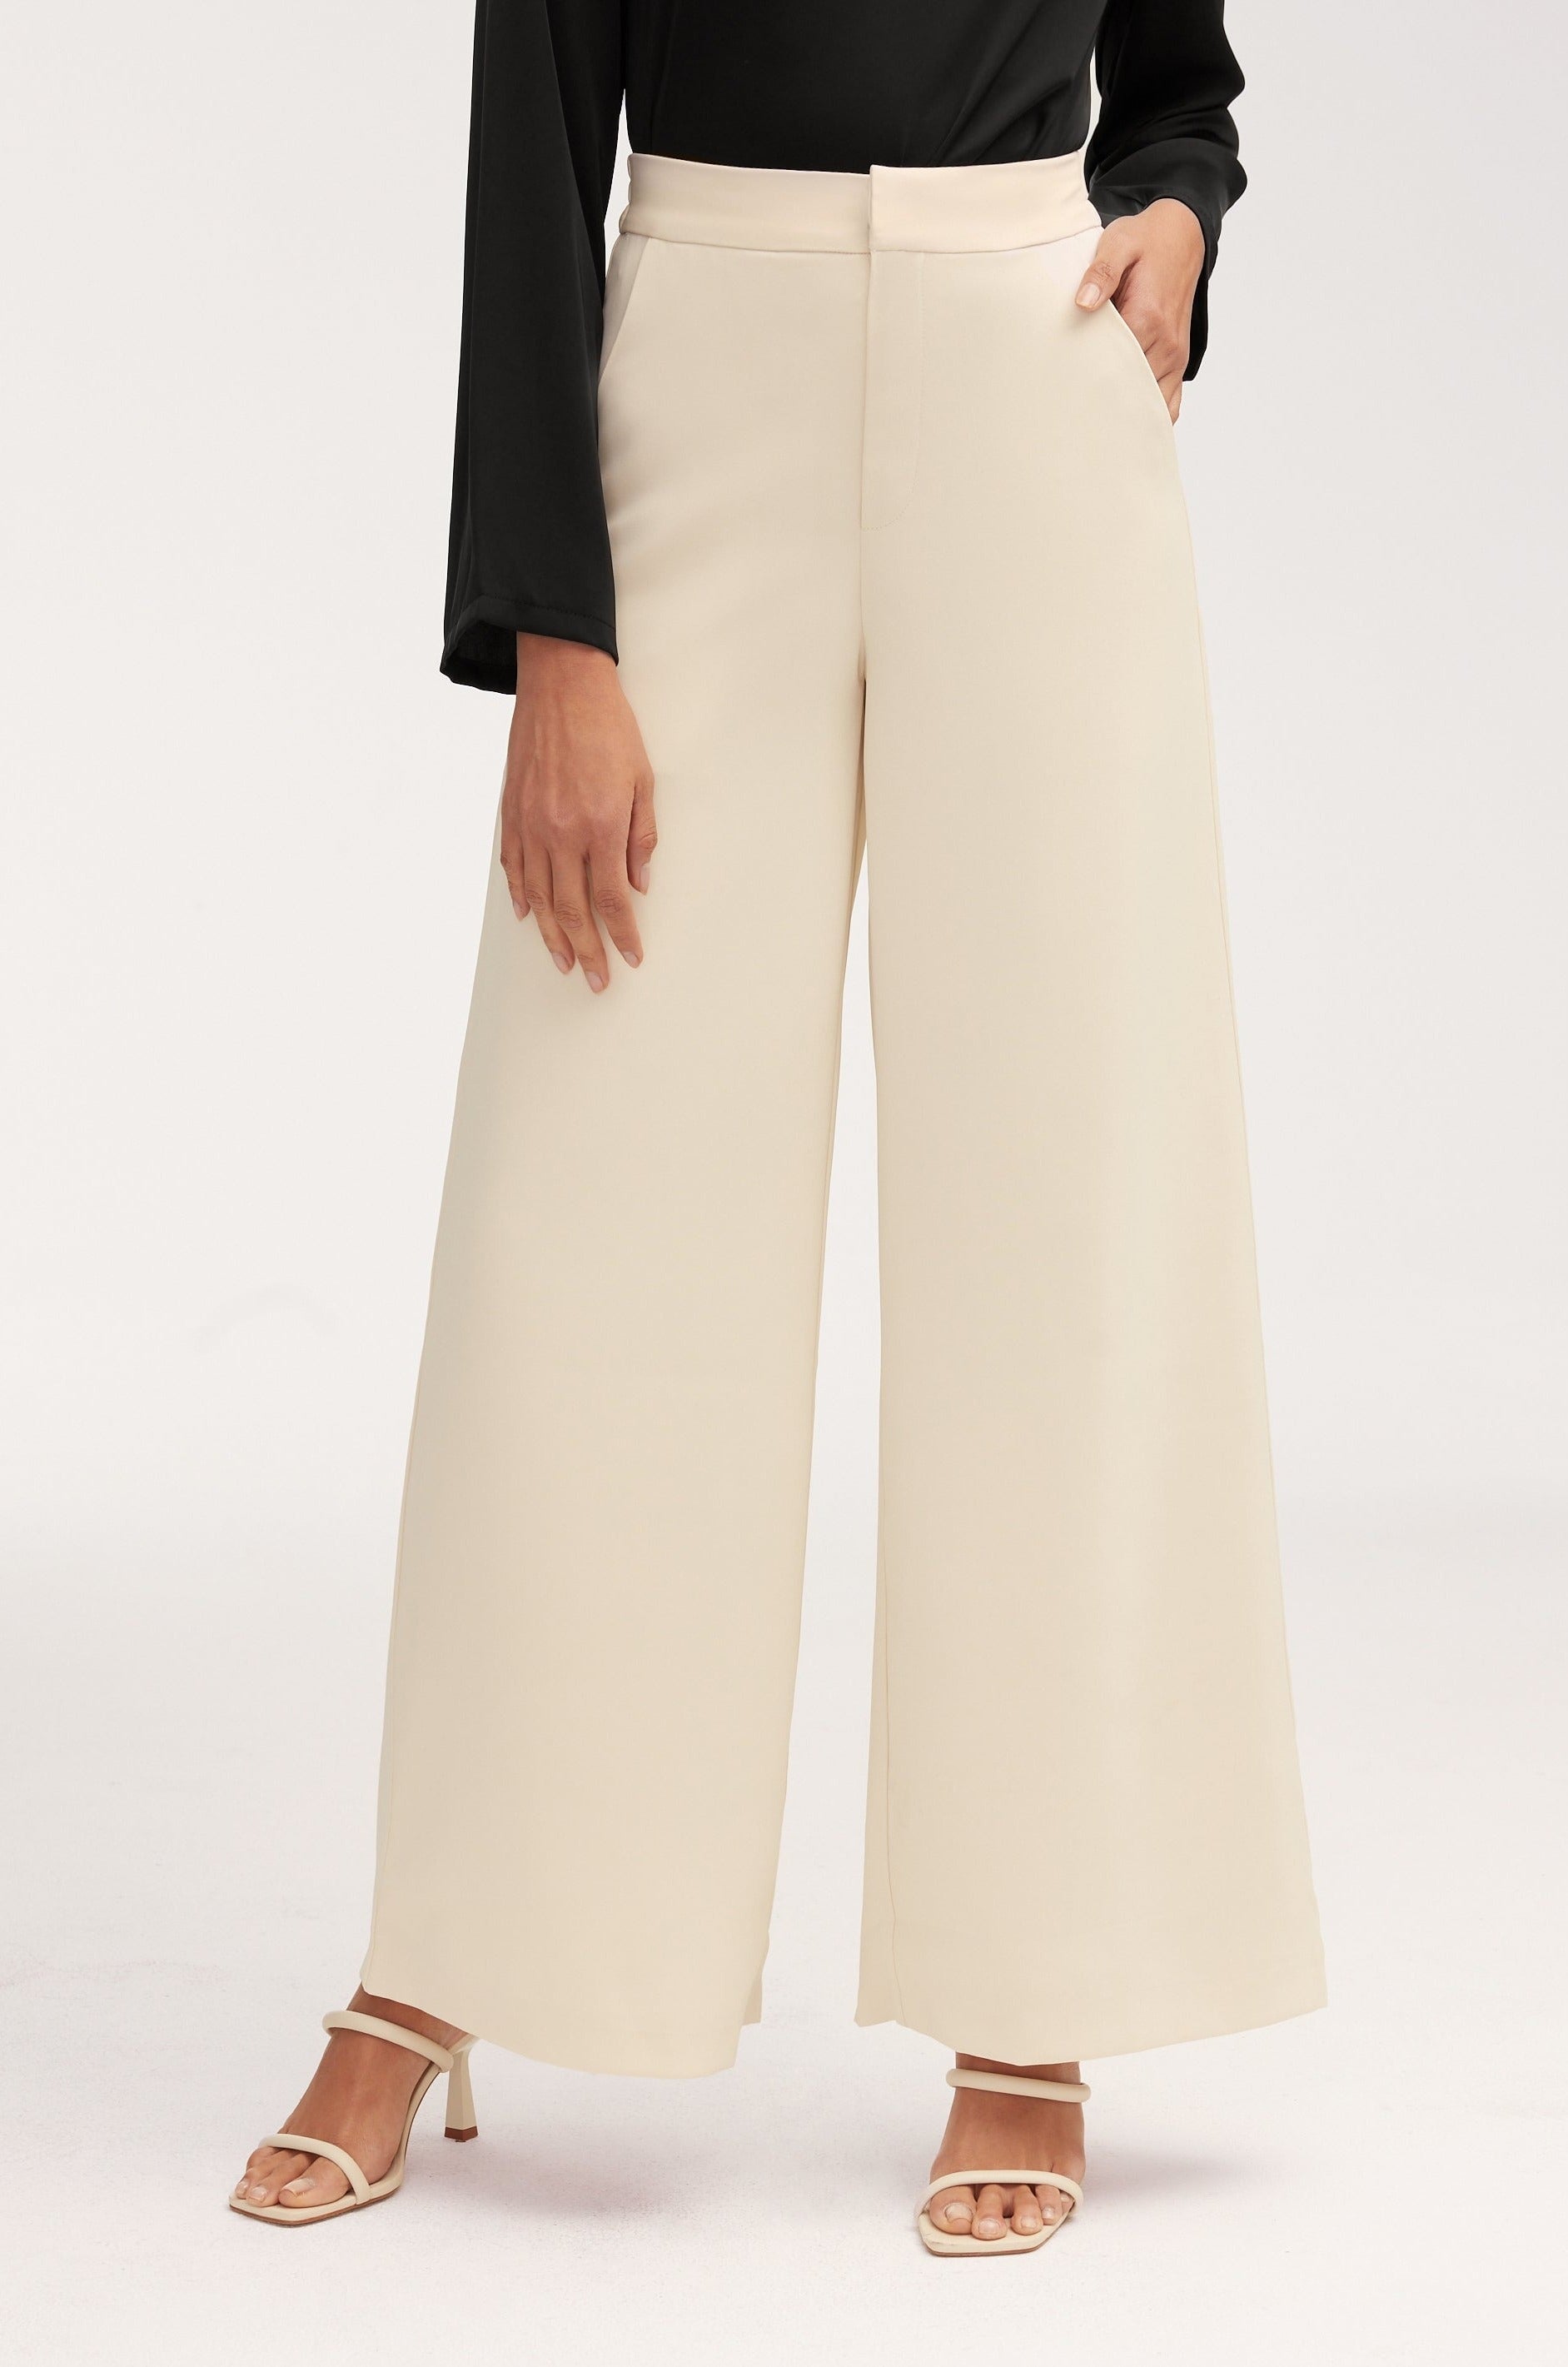 Essential Ultra Wide Leg Pants - Off White Clothing Veiled 